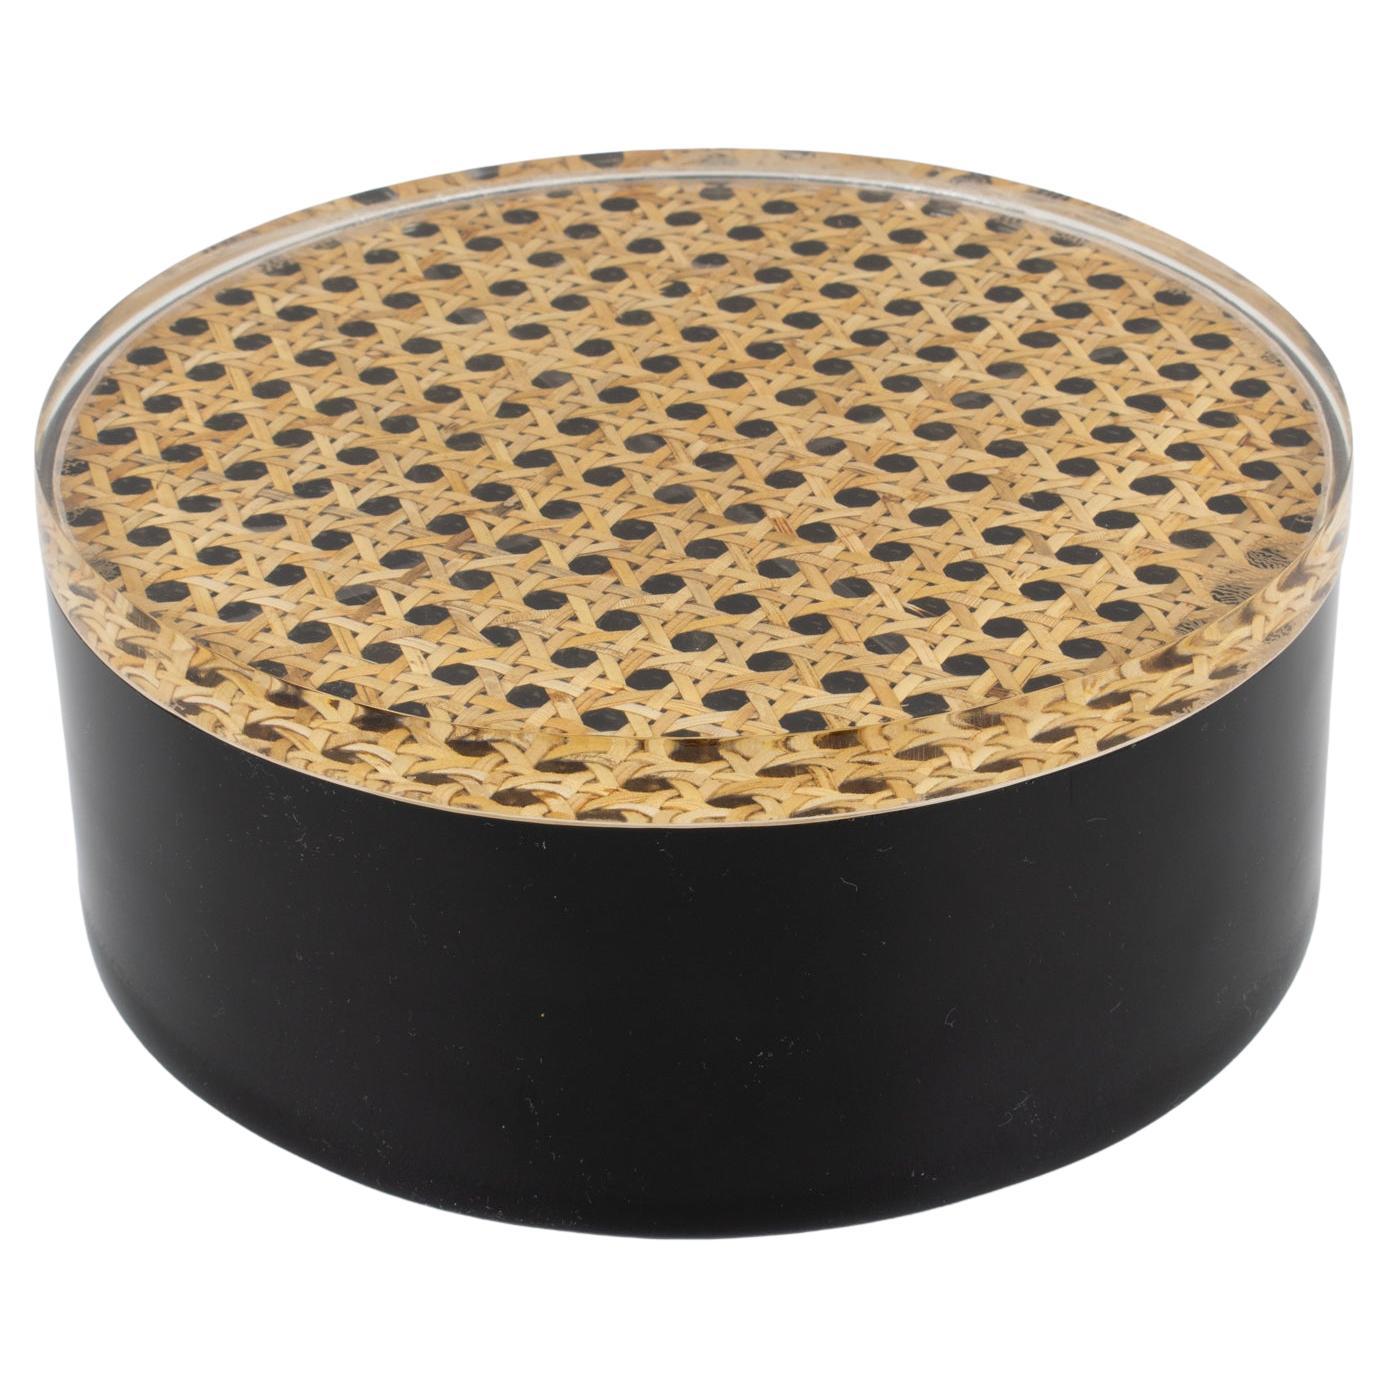 Black Lucite and Rattan Box, Italy 1970s For Sale